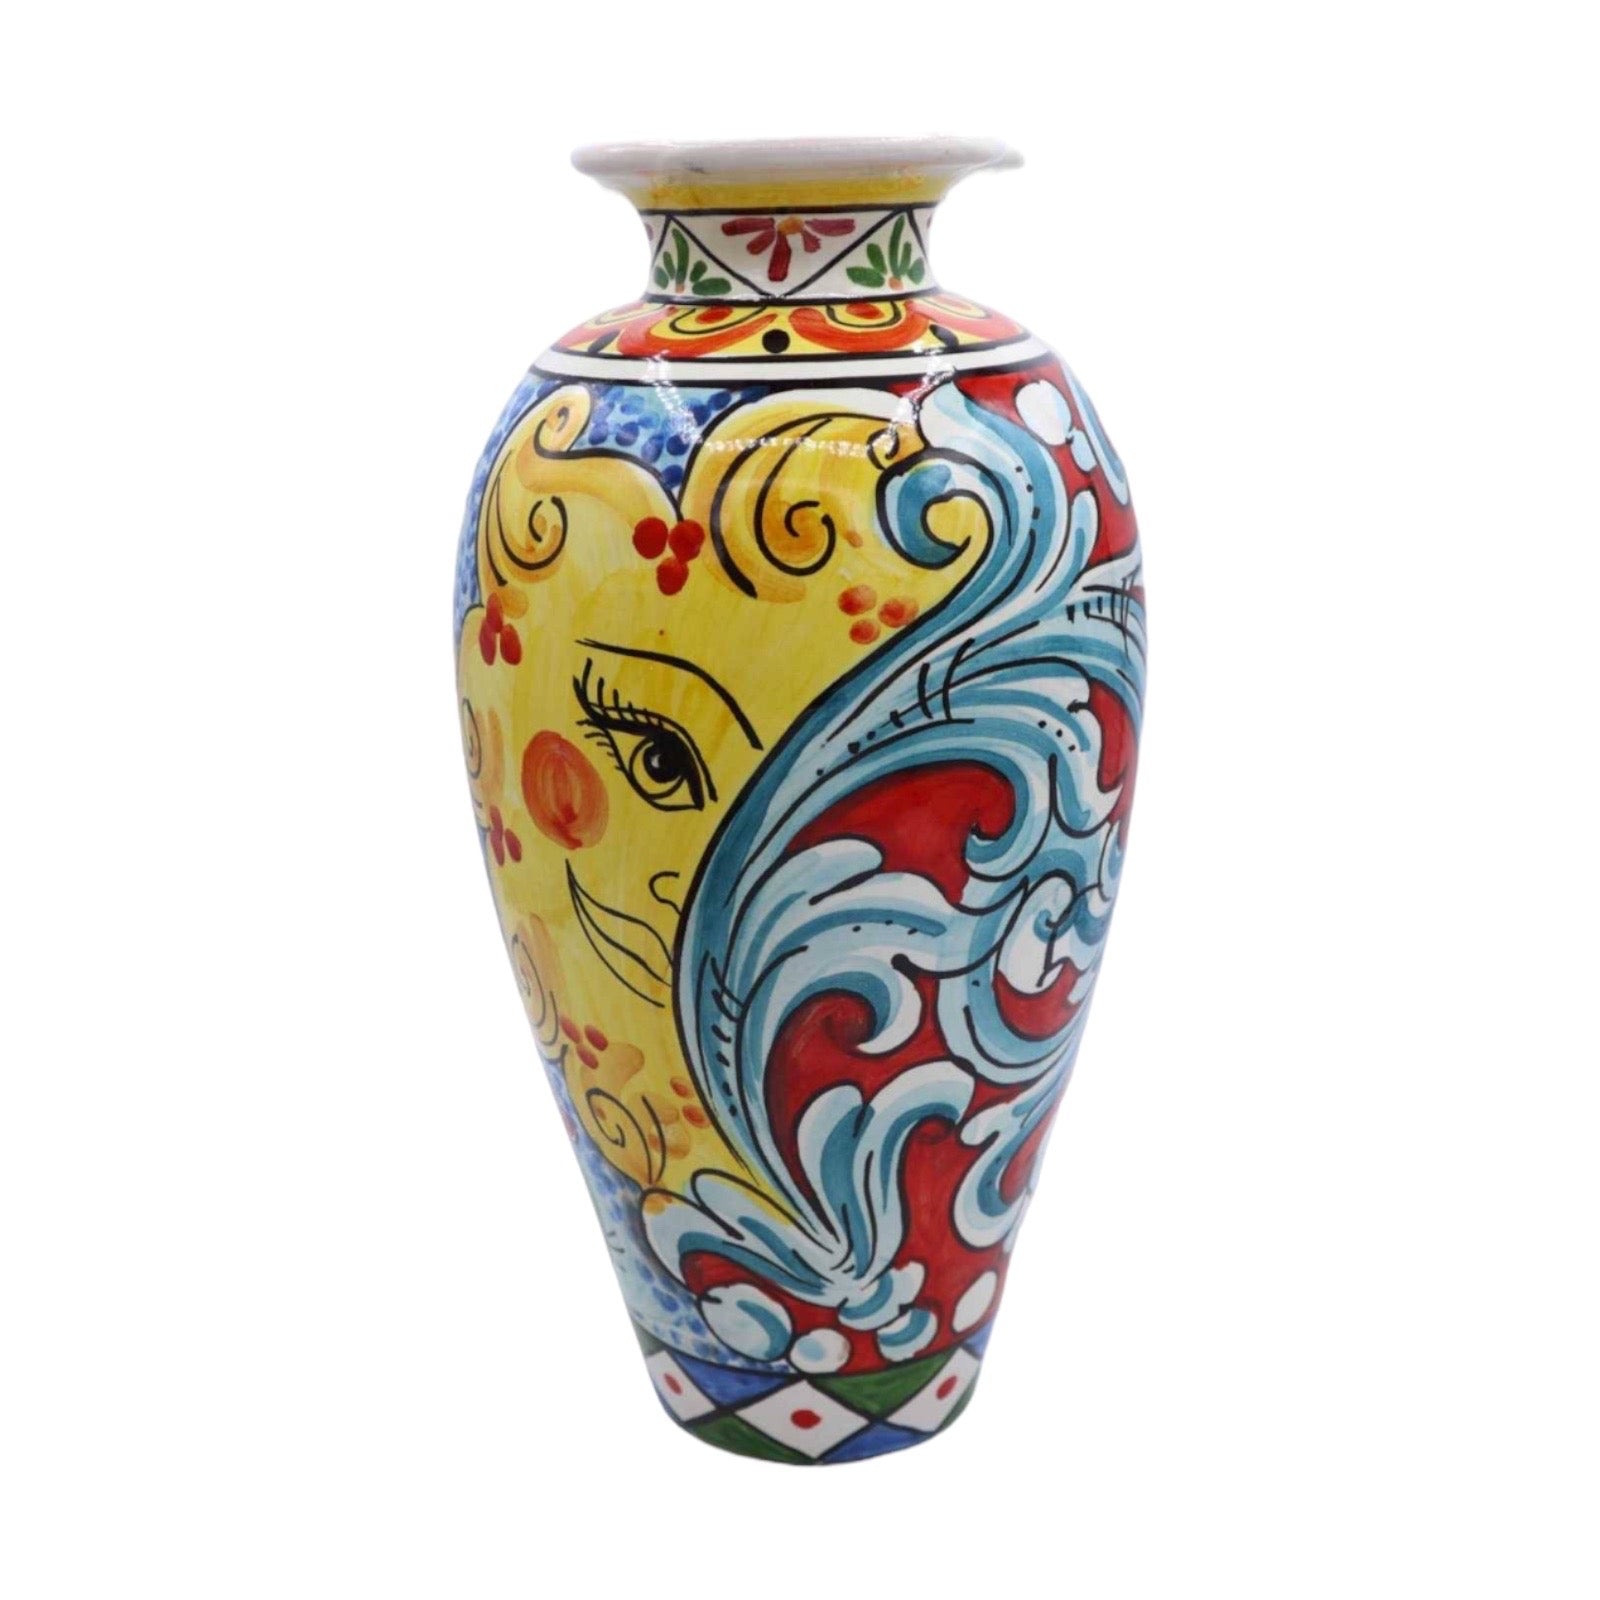 Caramic Vase With Baroque decoration, sun, cart wheel and prickly pear shovel, height 30 cm